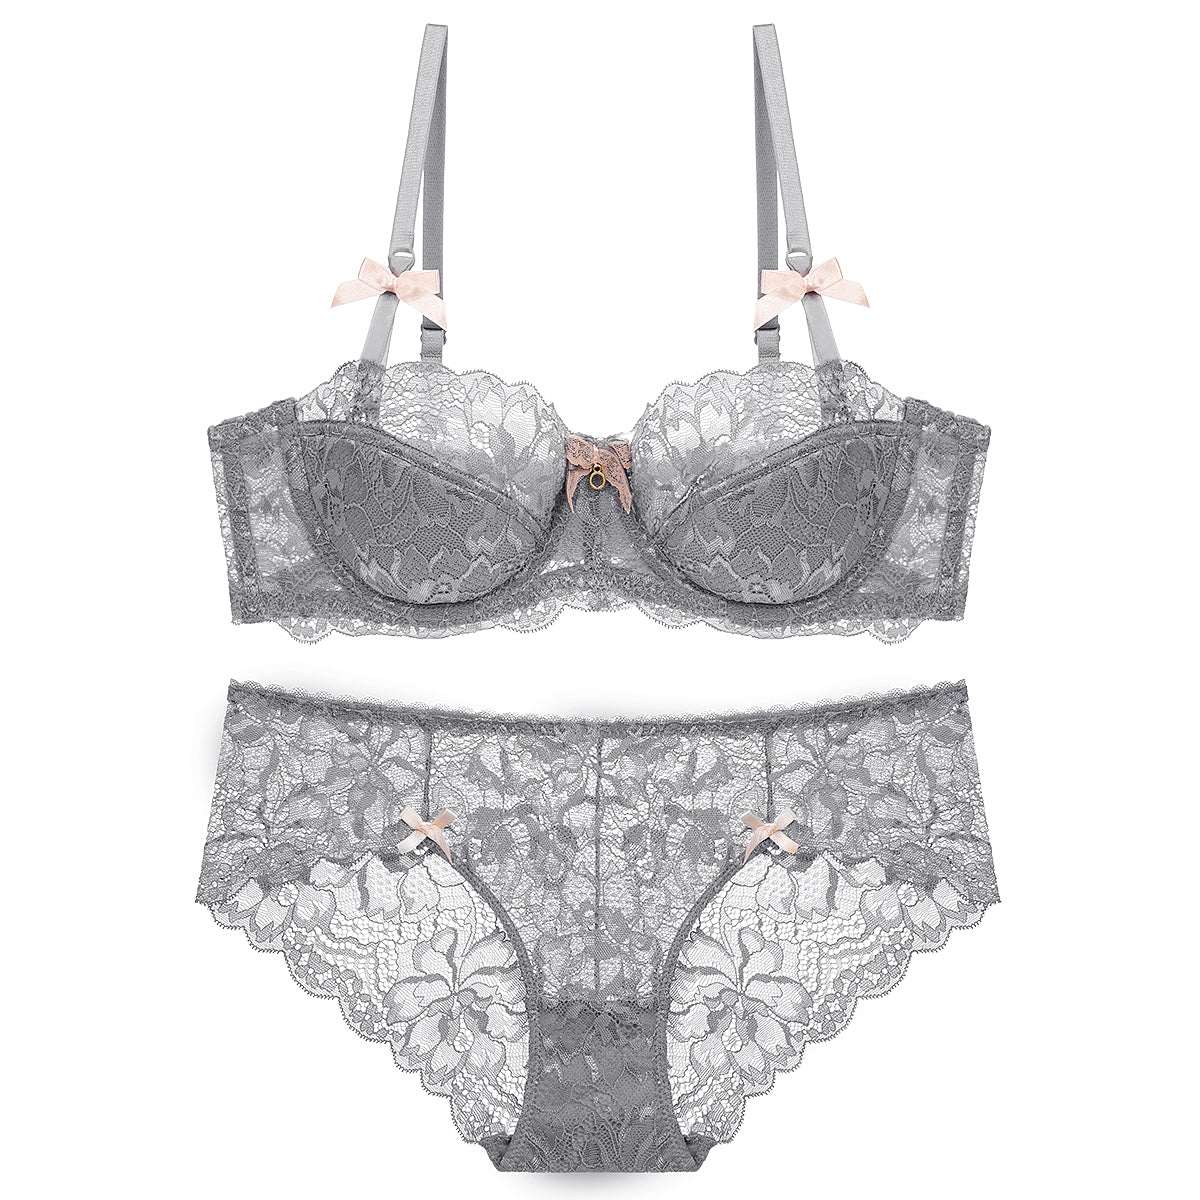 sexy lace lingerie in gray color